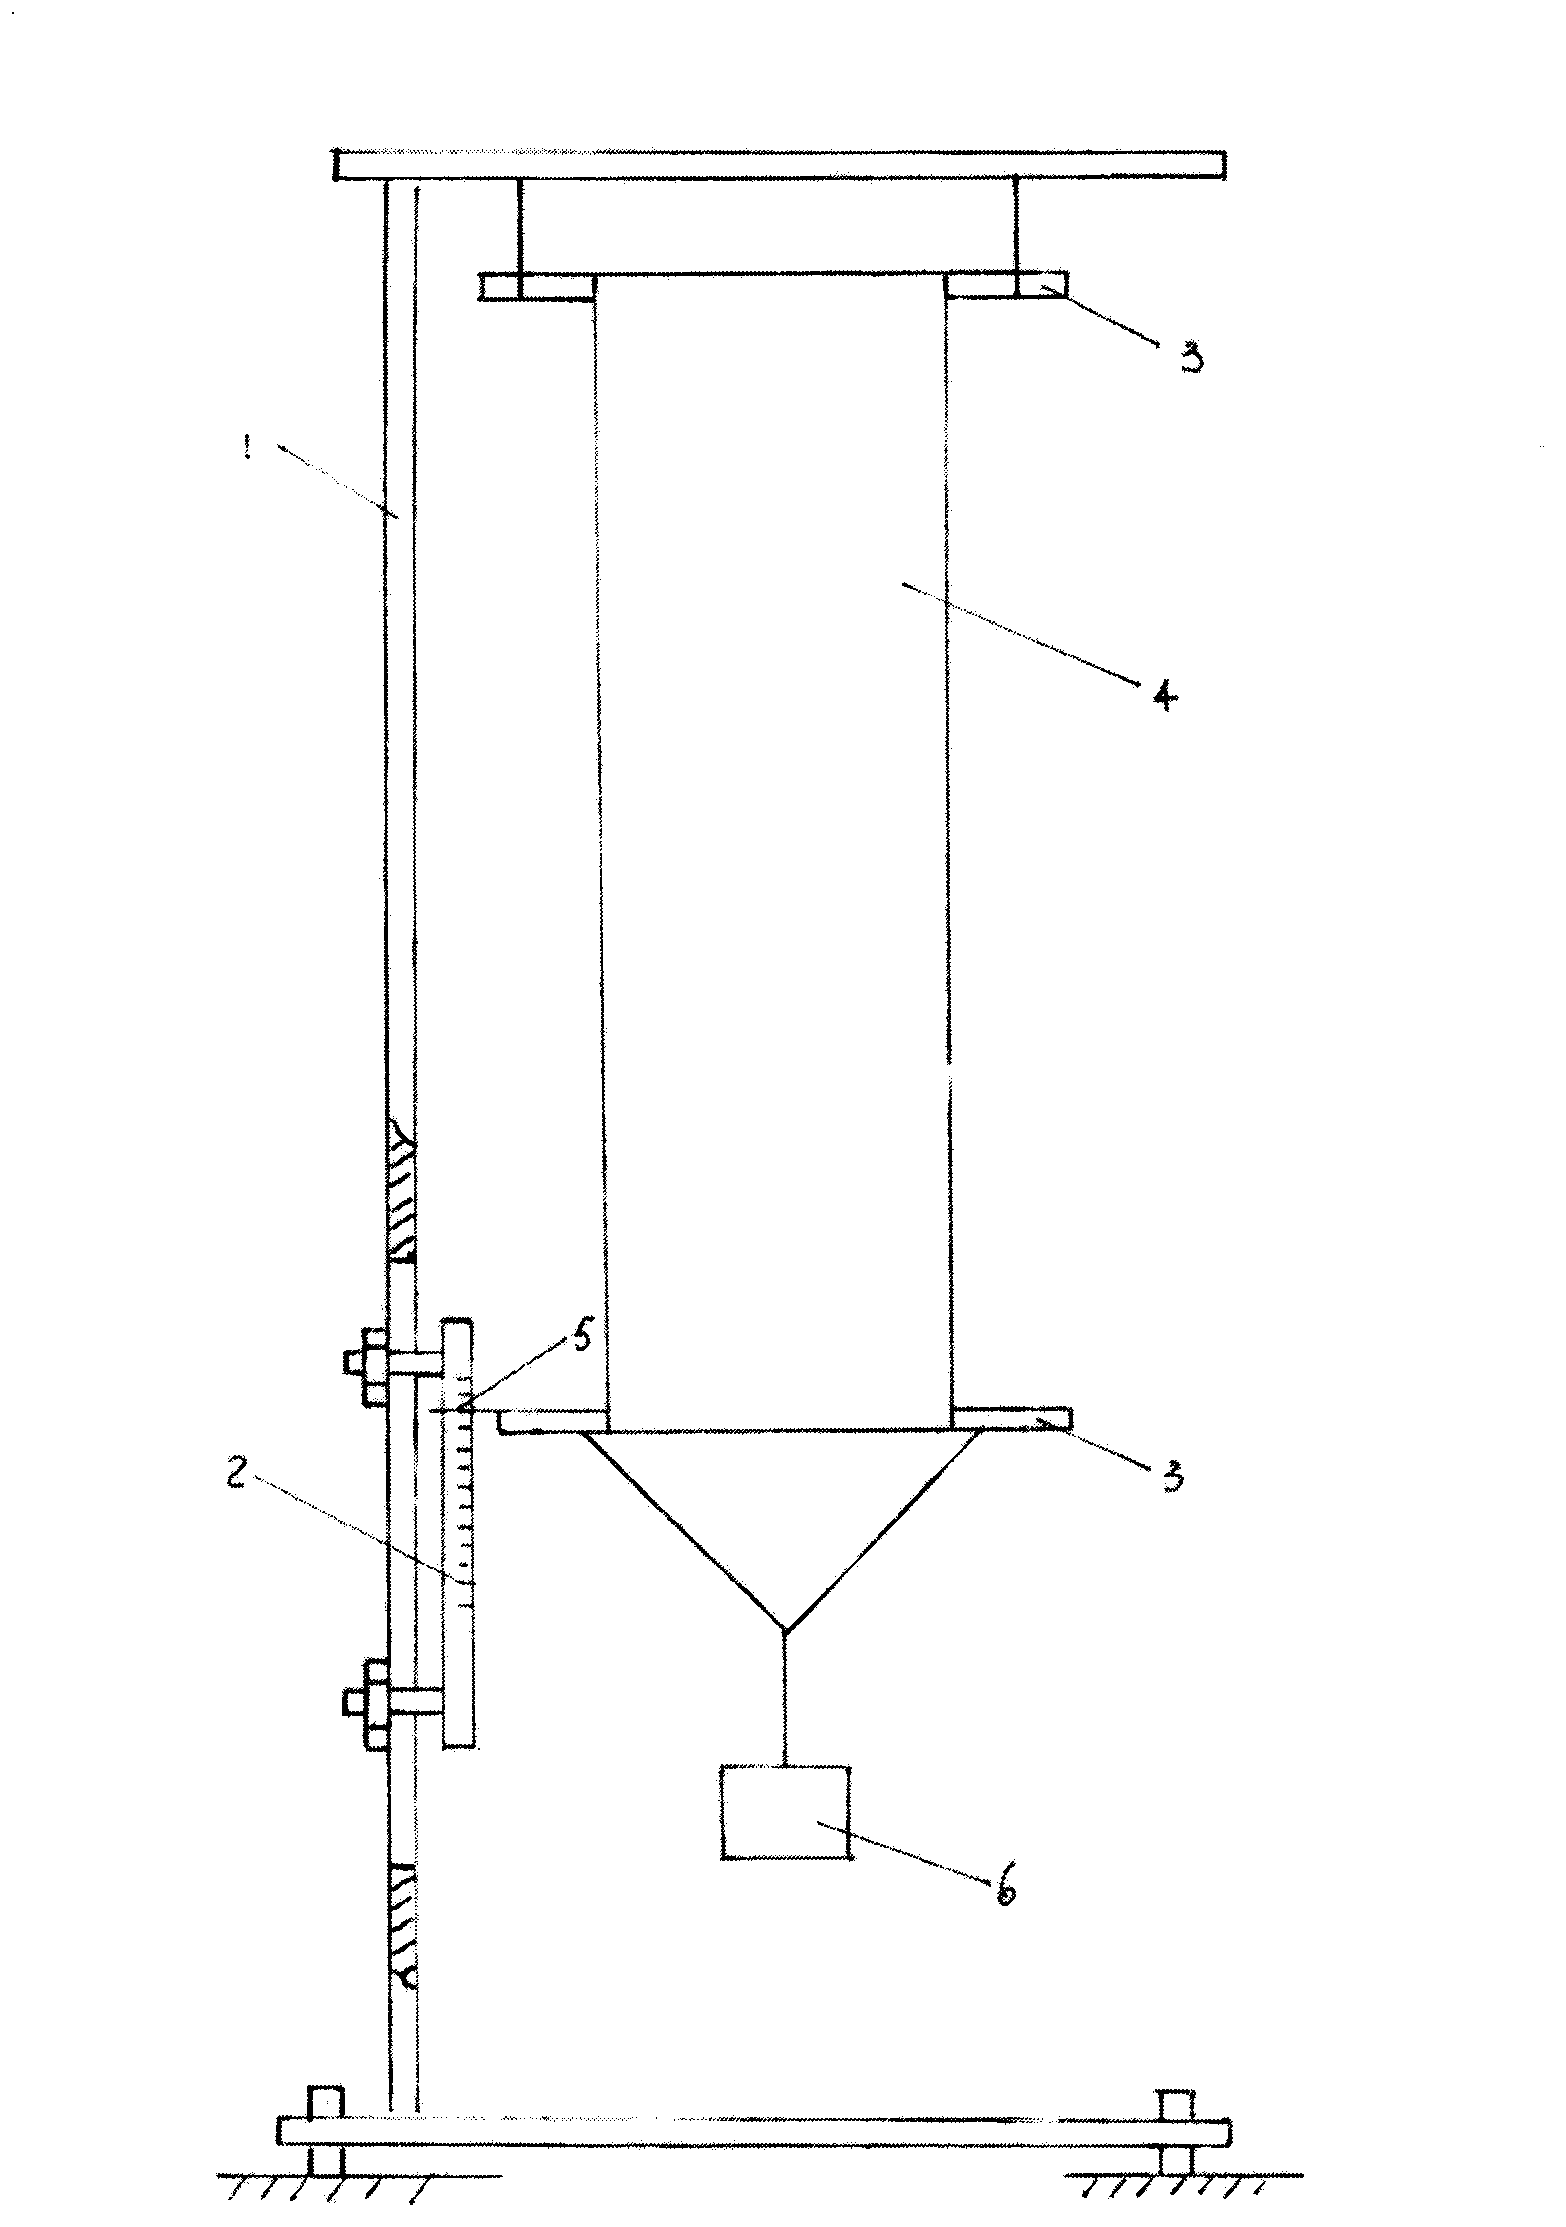 Fabric creep and relaxation measurement method and device